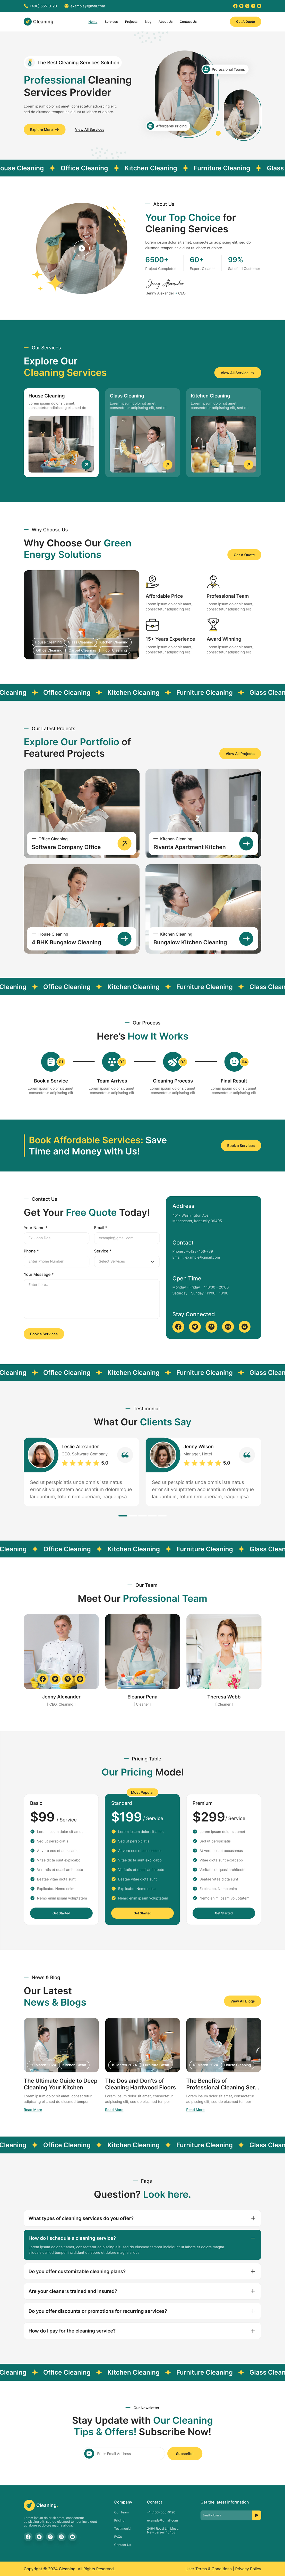 cleaning service website Home Page figma design